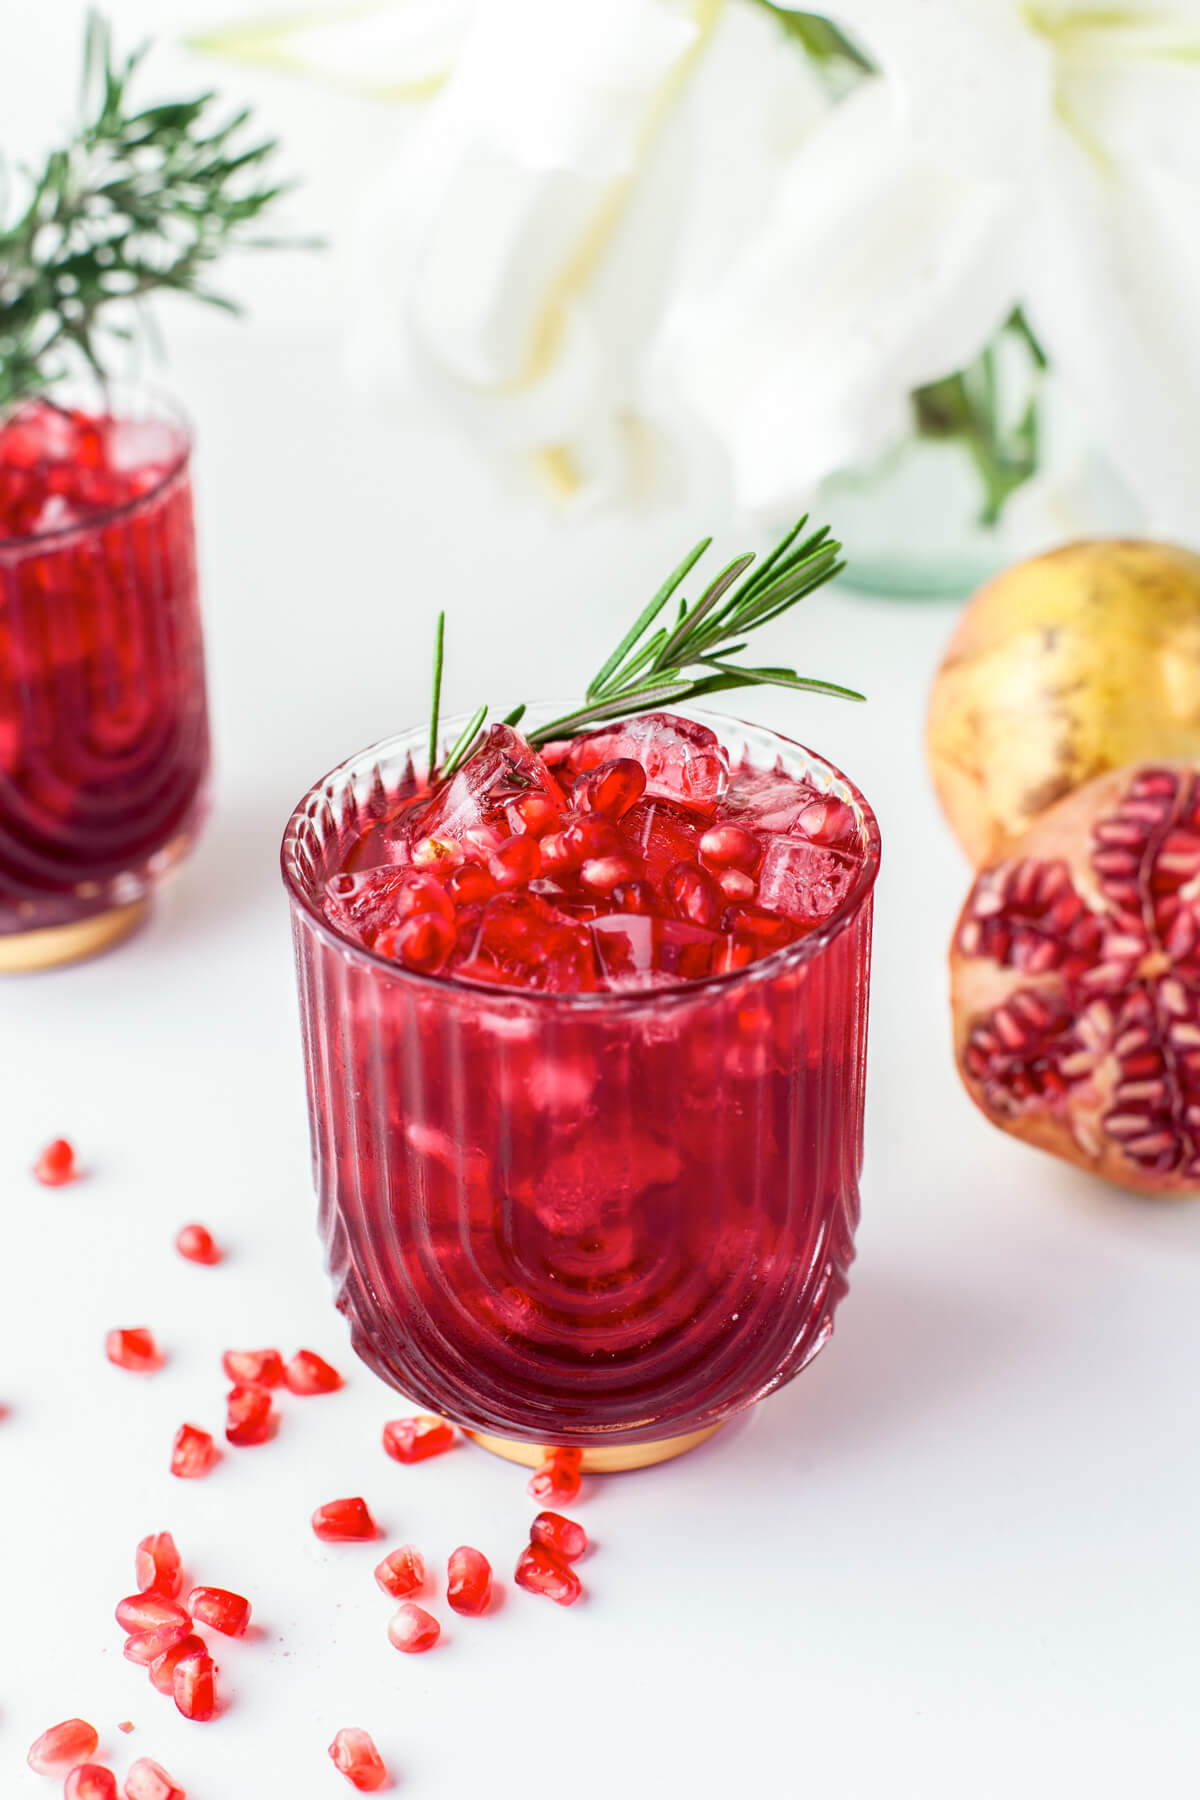 A stunning ruby red cocktail in a rocks glass garnished with pomegranate arils and a sprig of rosemary.